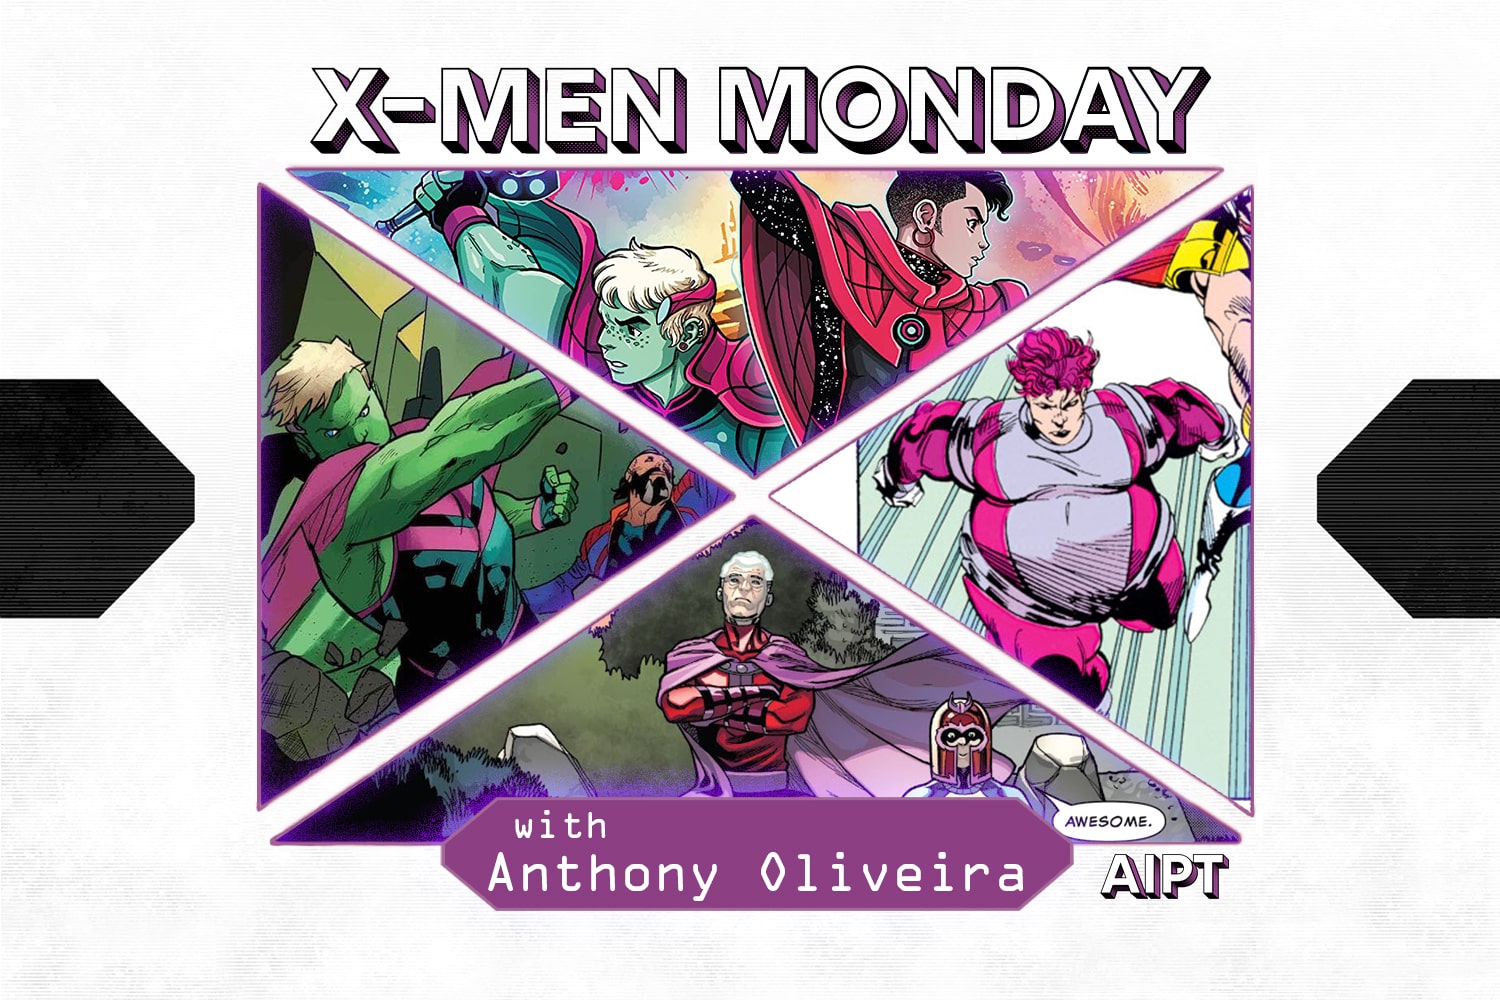 X-Men Monday #122 - Anthony Oliveira Talks Wiccan and Hulkling, the House of M and More